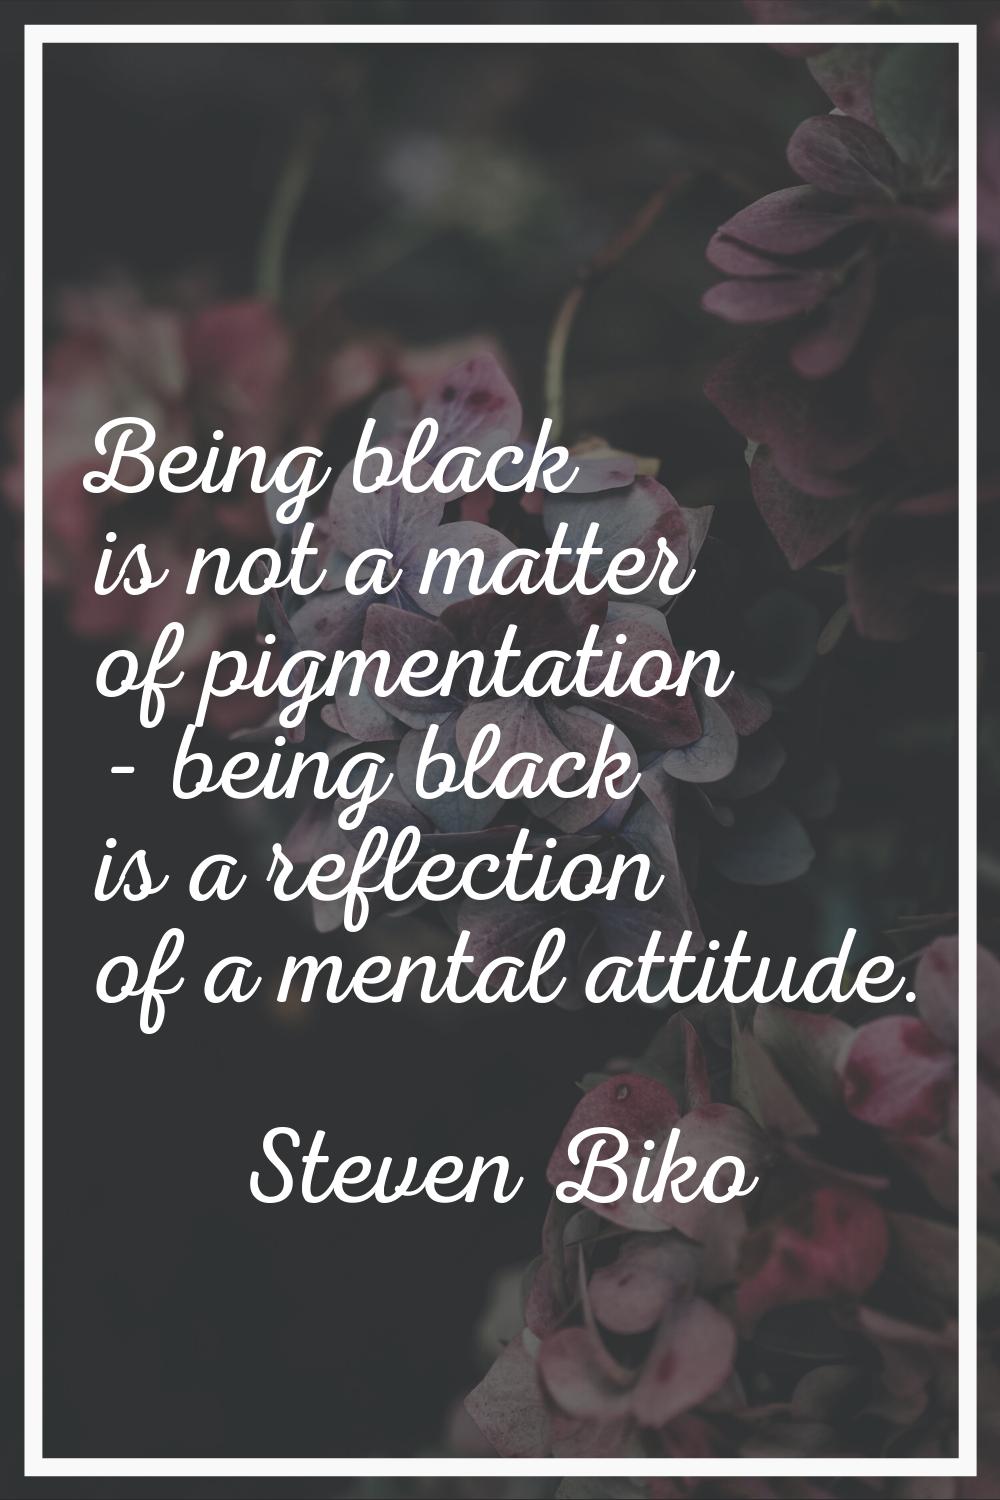 Being black is not a matter of pigmentation - being black is a reflection of a mental attitude.